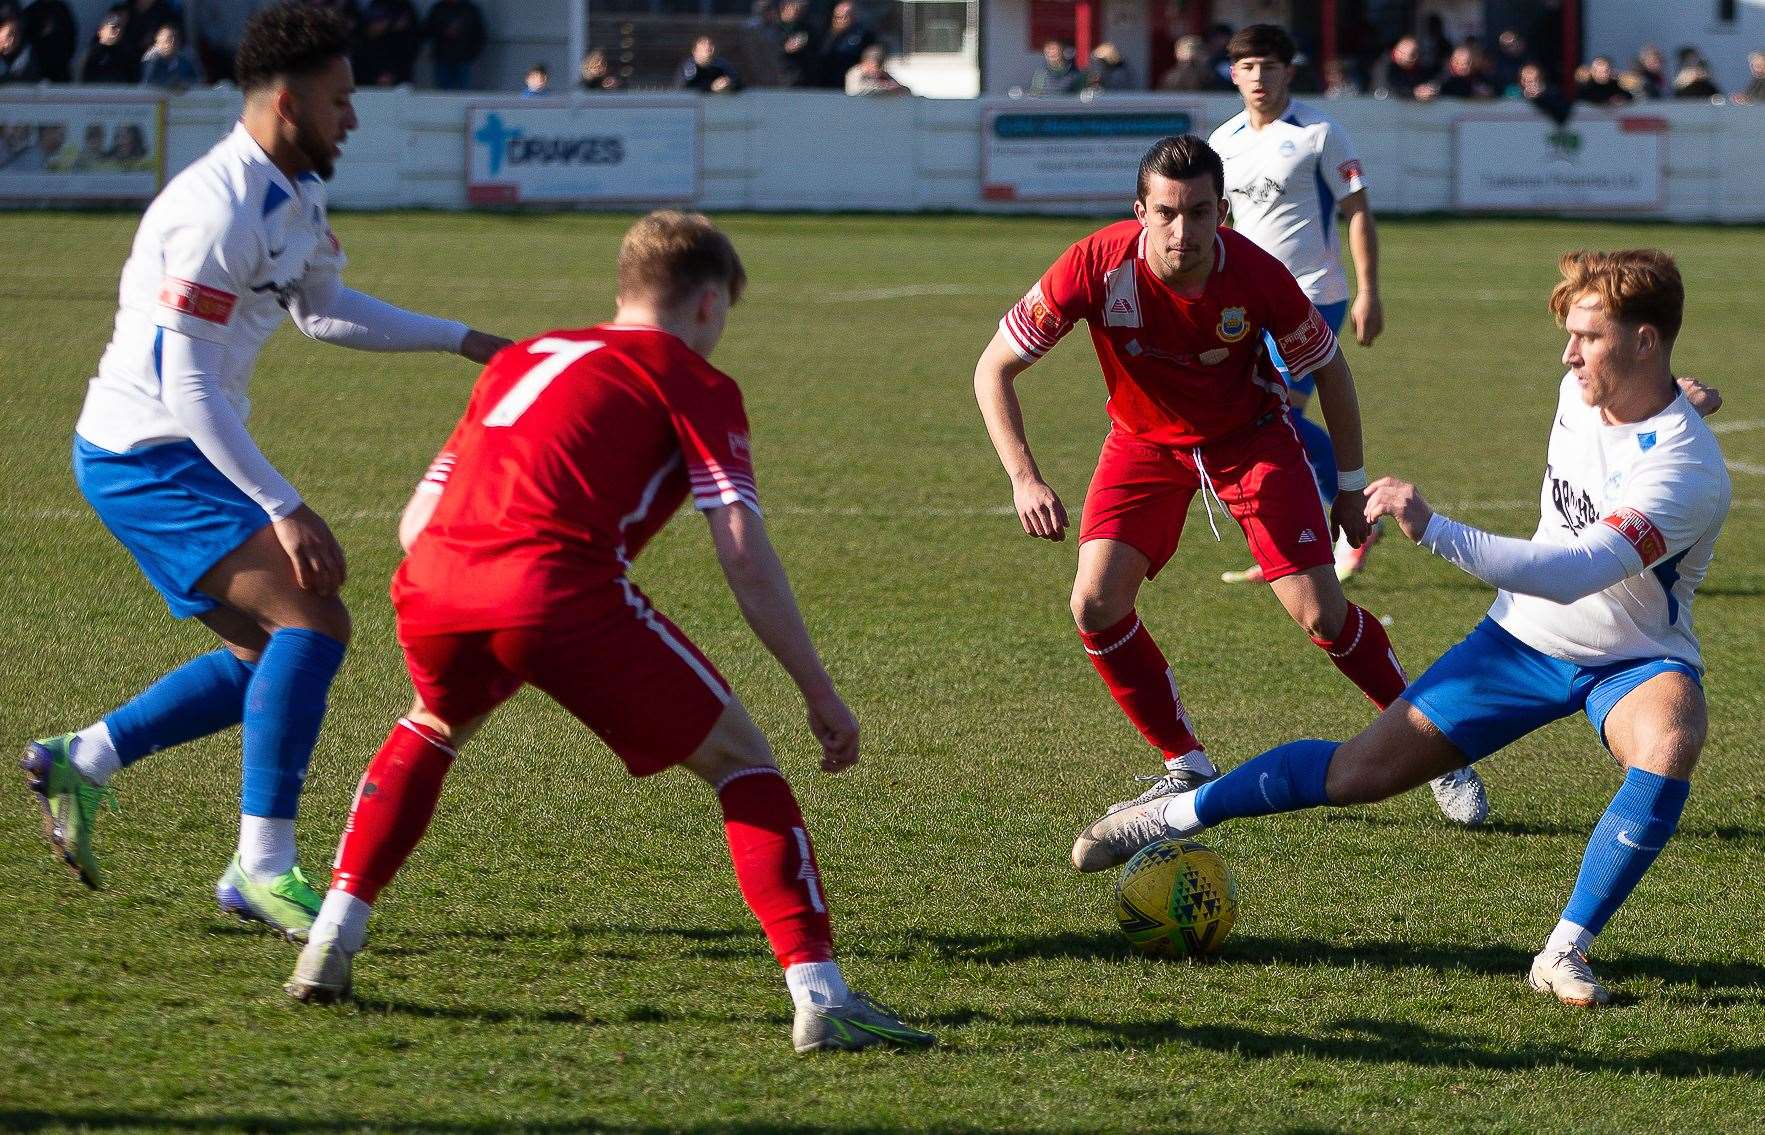 Whitstable duo George McIlroy and Will Thomas close in on a Hythe player. Picture: Les Biggs